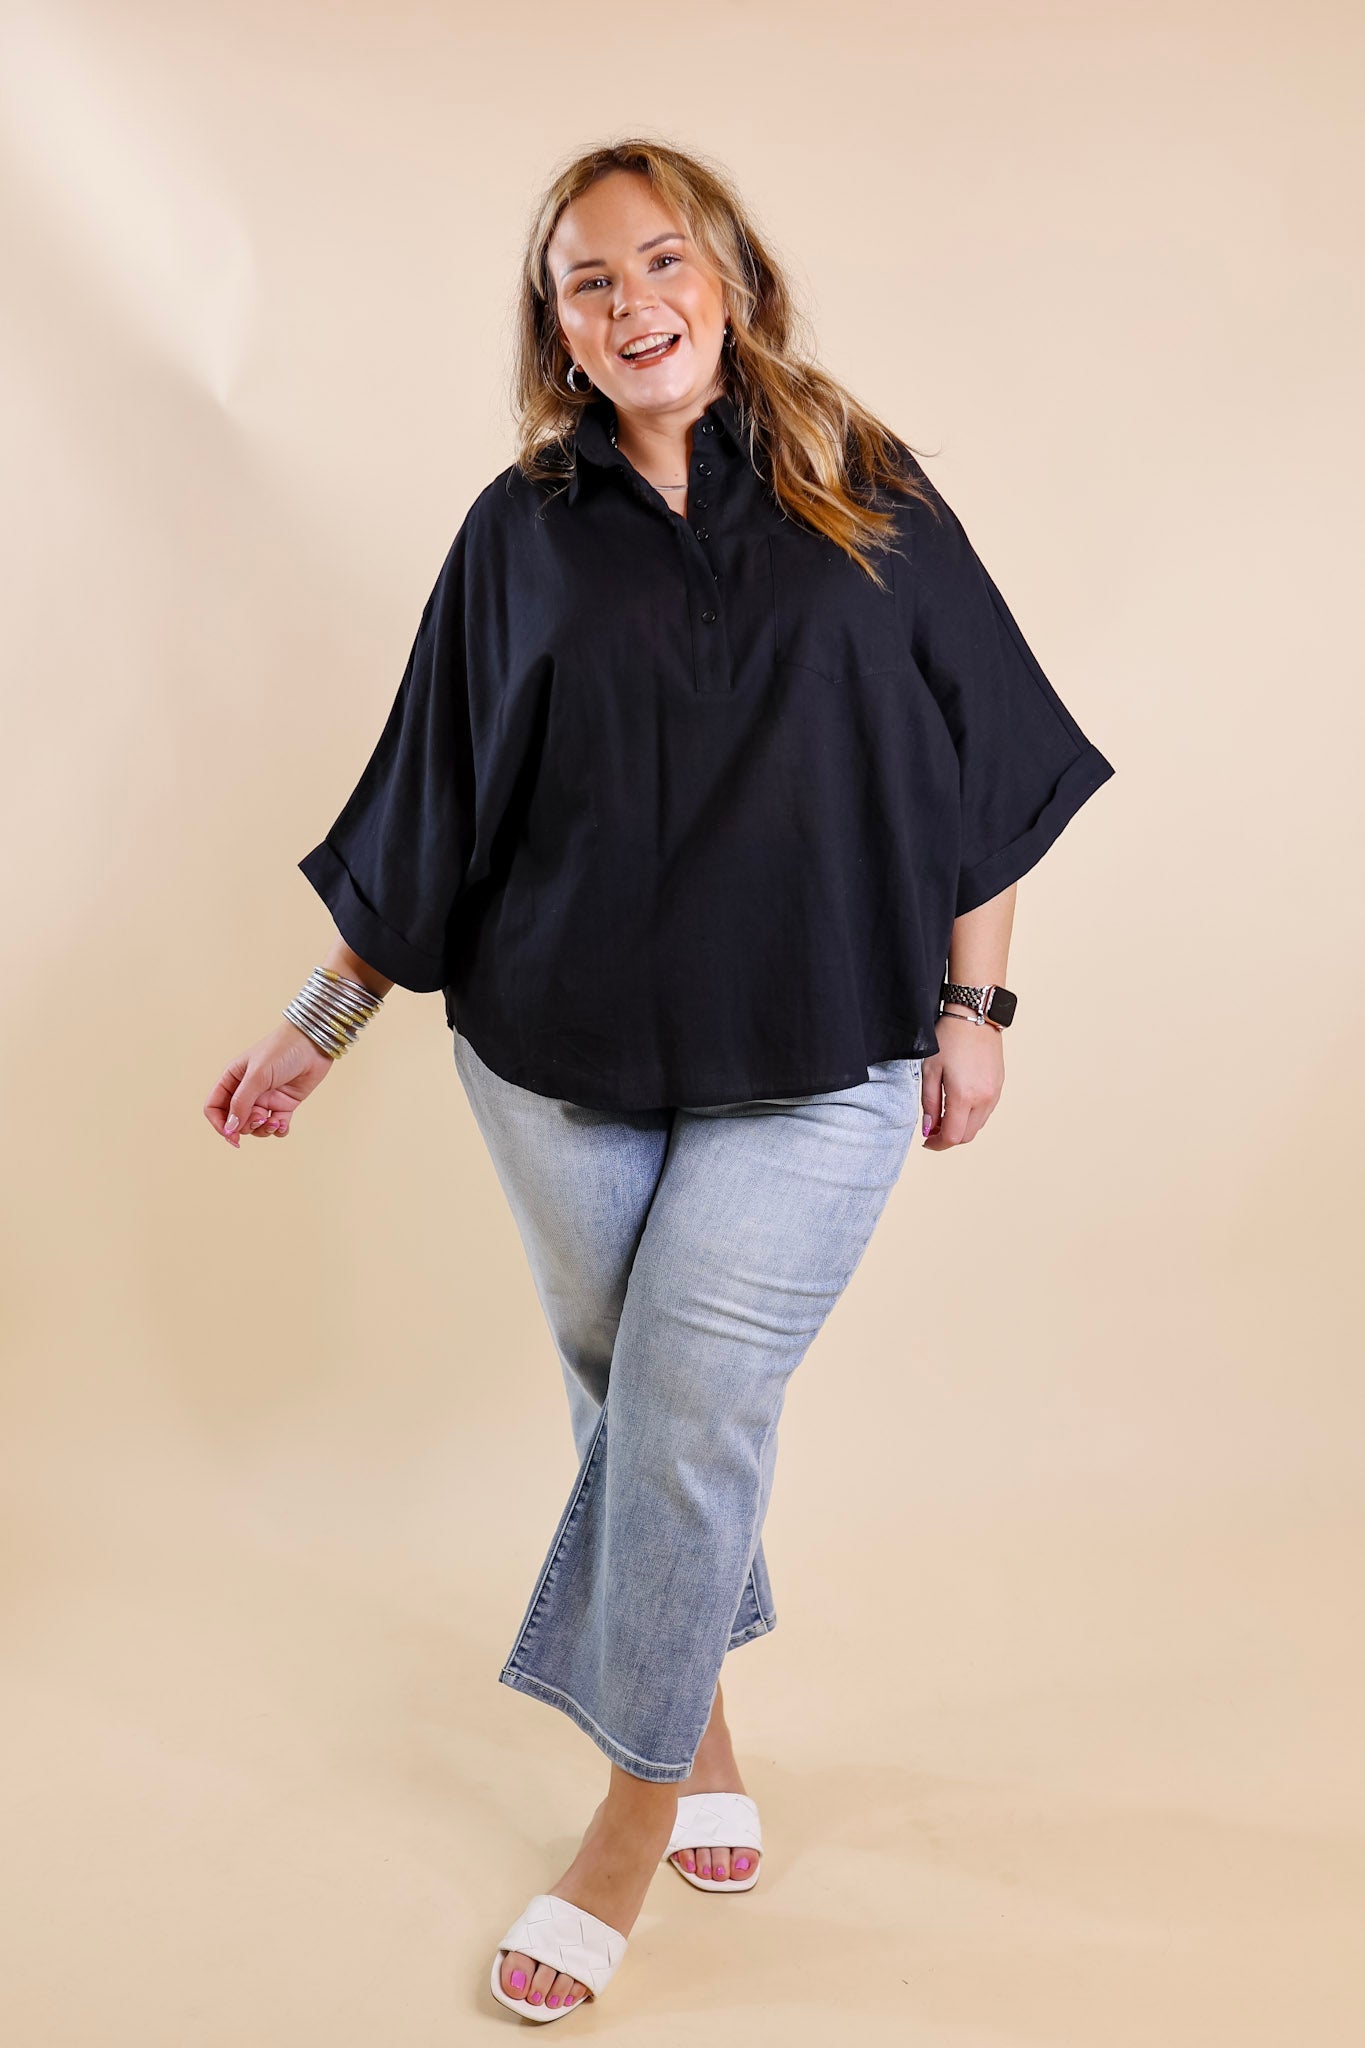 Sweet Surprise Half Button Up Poncho Top with Collared Neckline in Black - Giddy Up Glamour Boutique